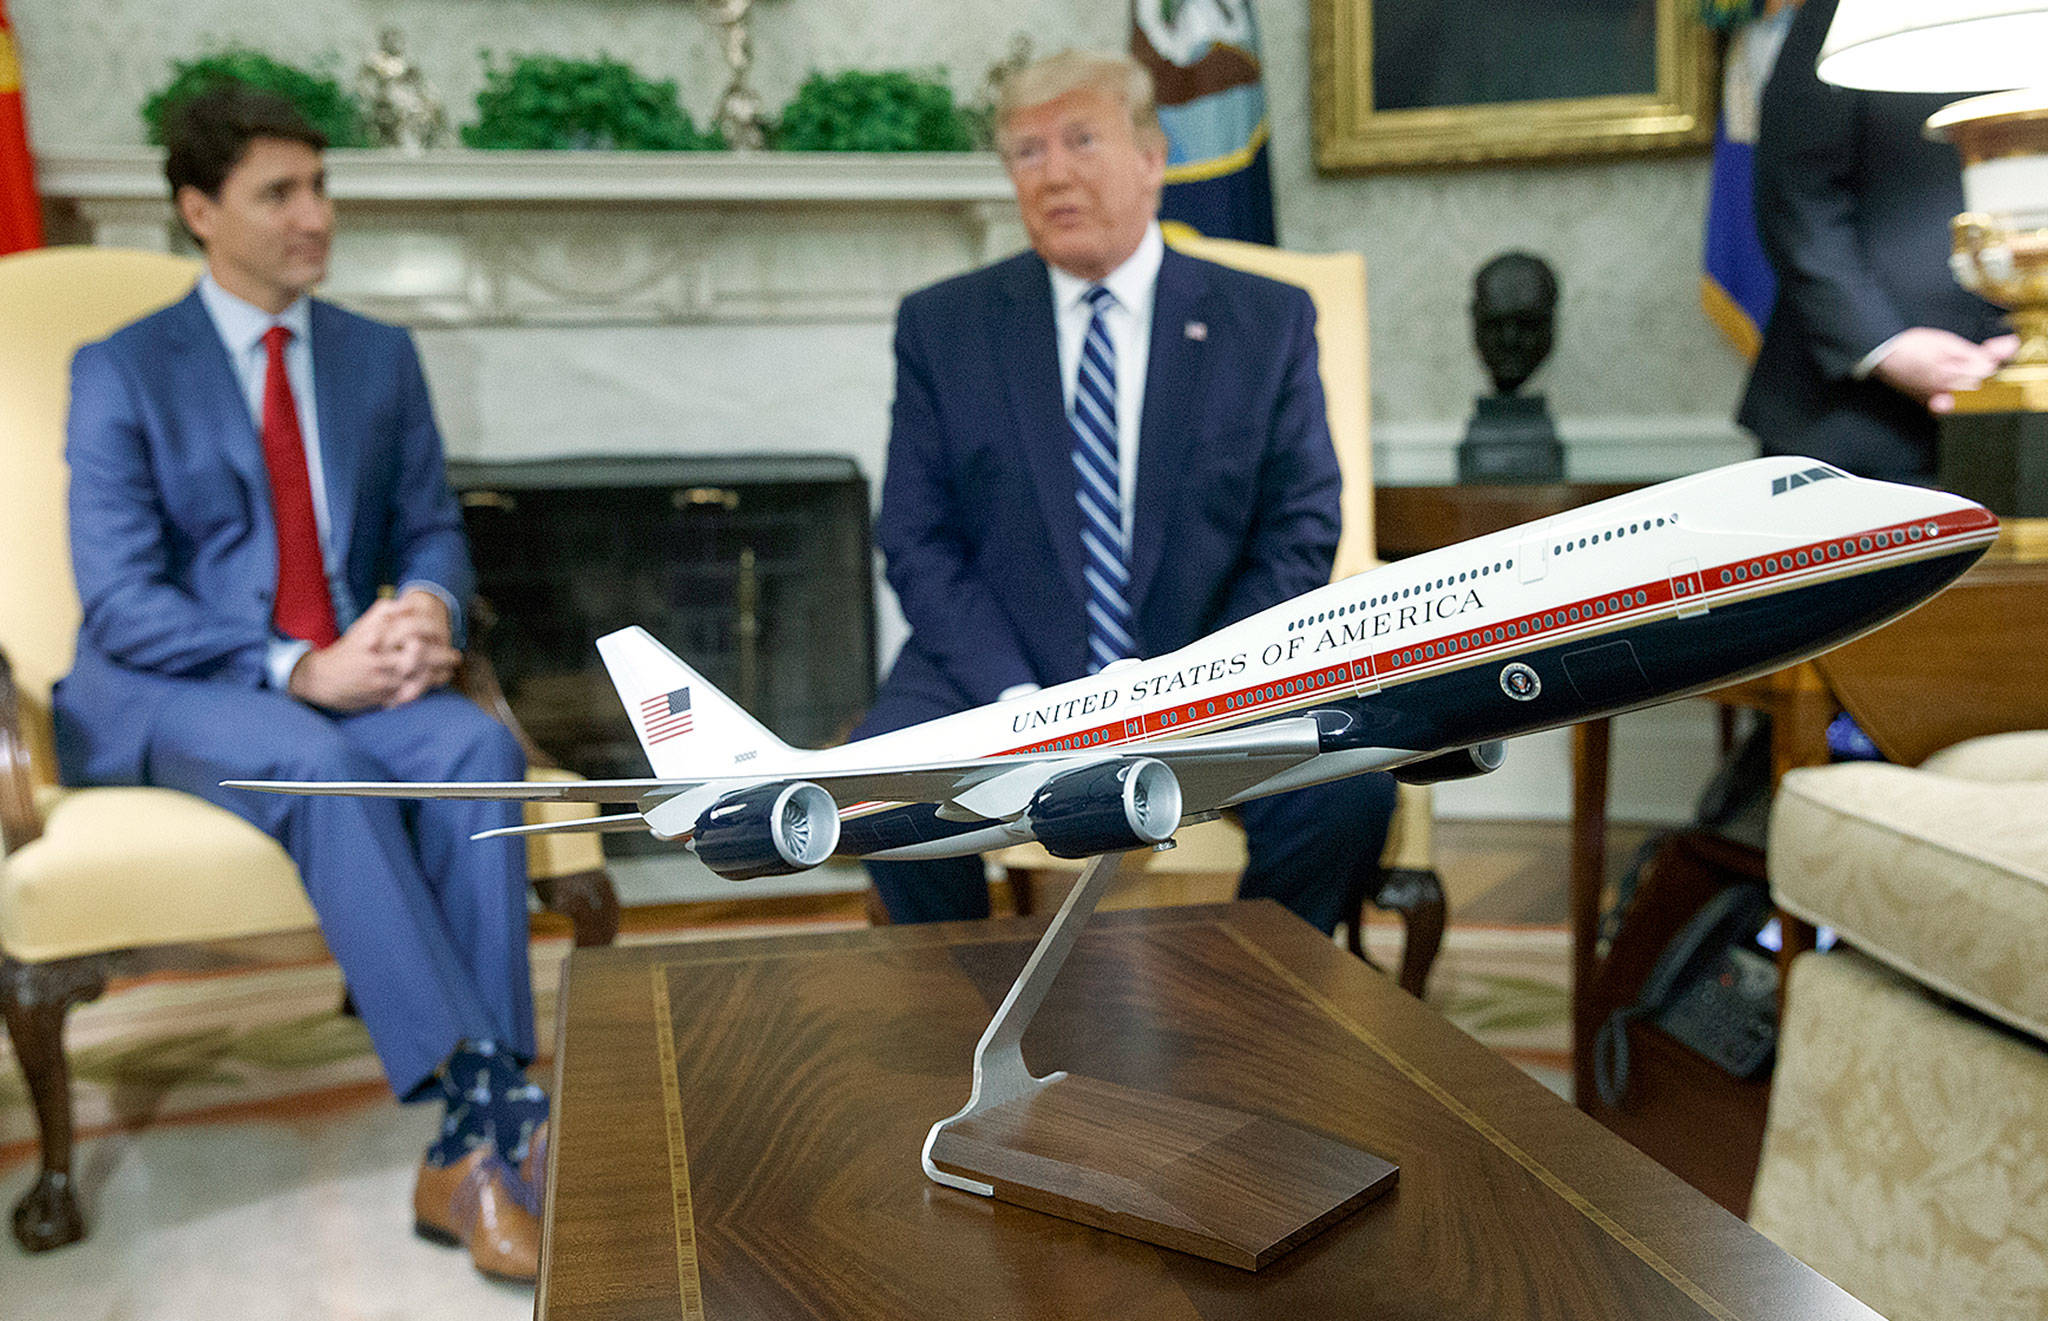 A model of the new Air Force One on a table during a meeting between President Donald Trump and Canadian Prime Minister Justin Trudeau (left) in the Oval Office of the White House in Washington on Thursday. (AP Photo/Evan Vucci)